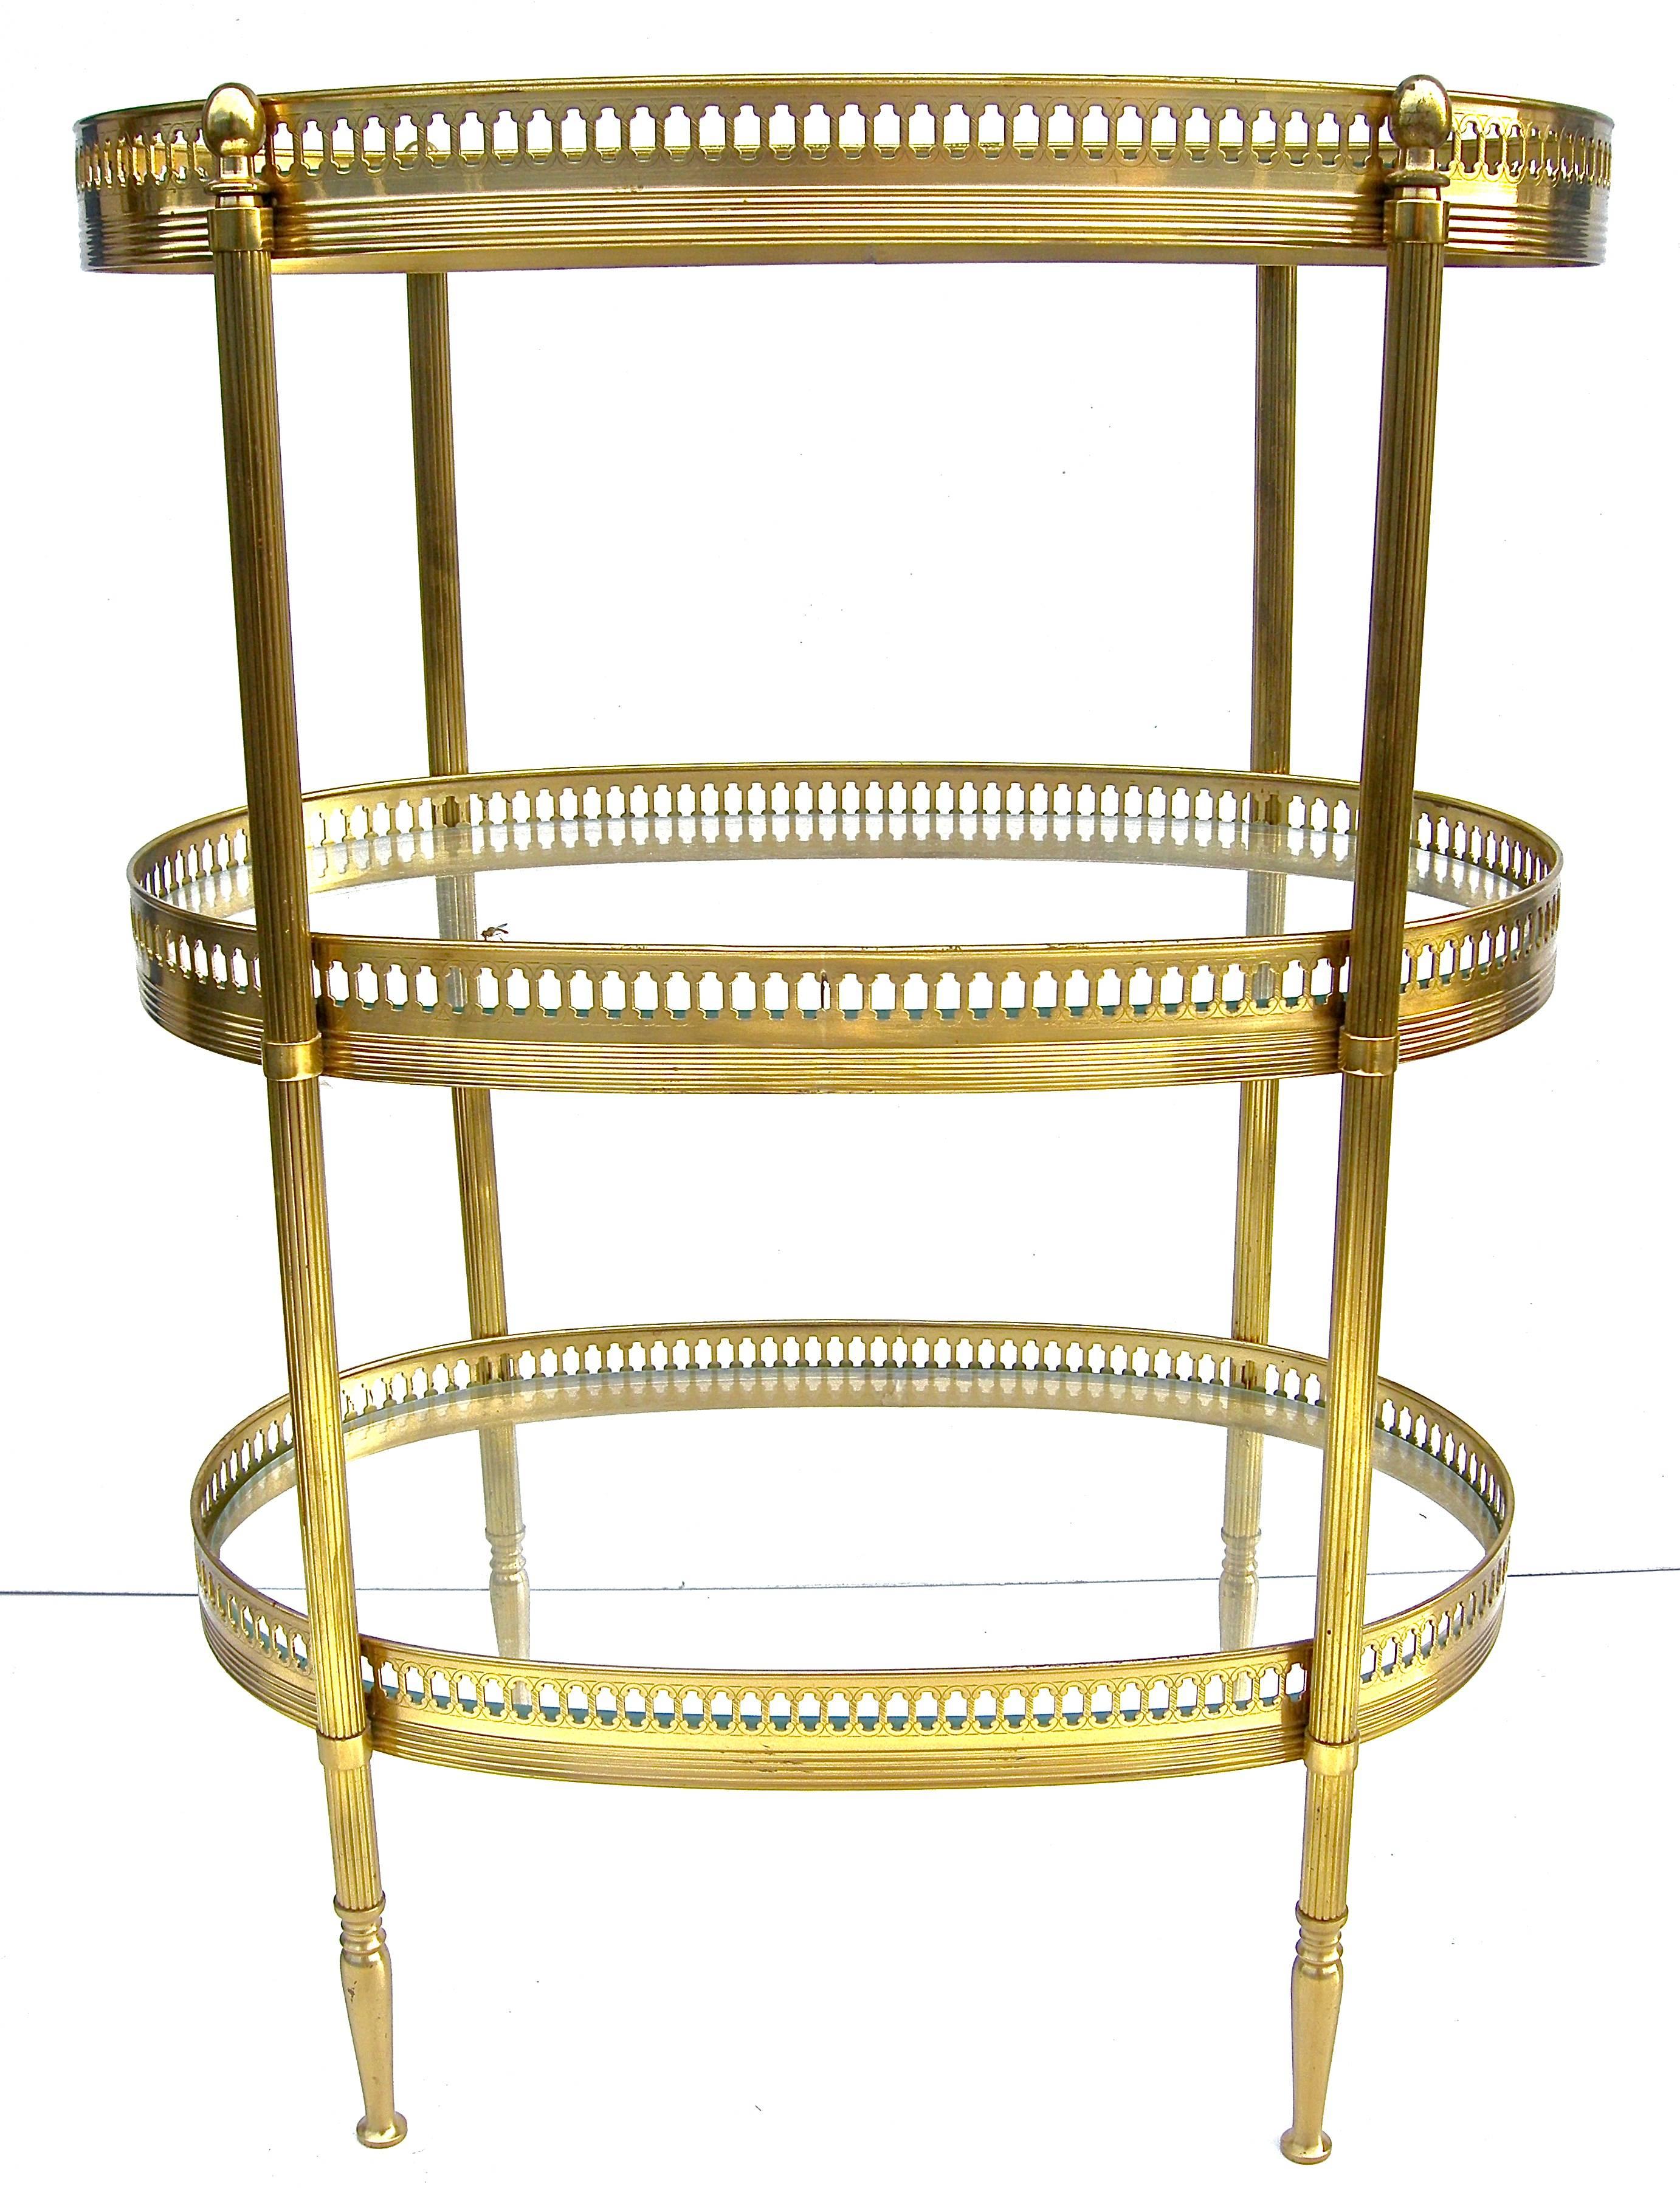 Hand-Crafted Diminutive Jansen-Style Three-Tier Side Table For Sale